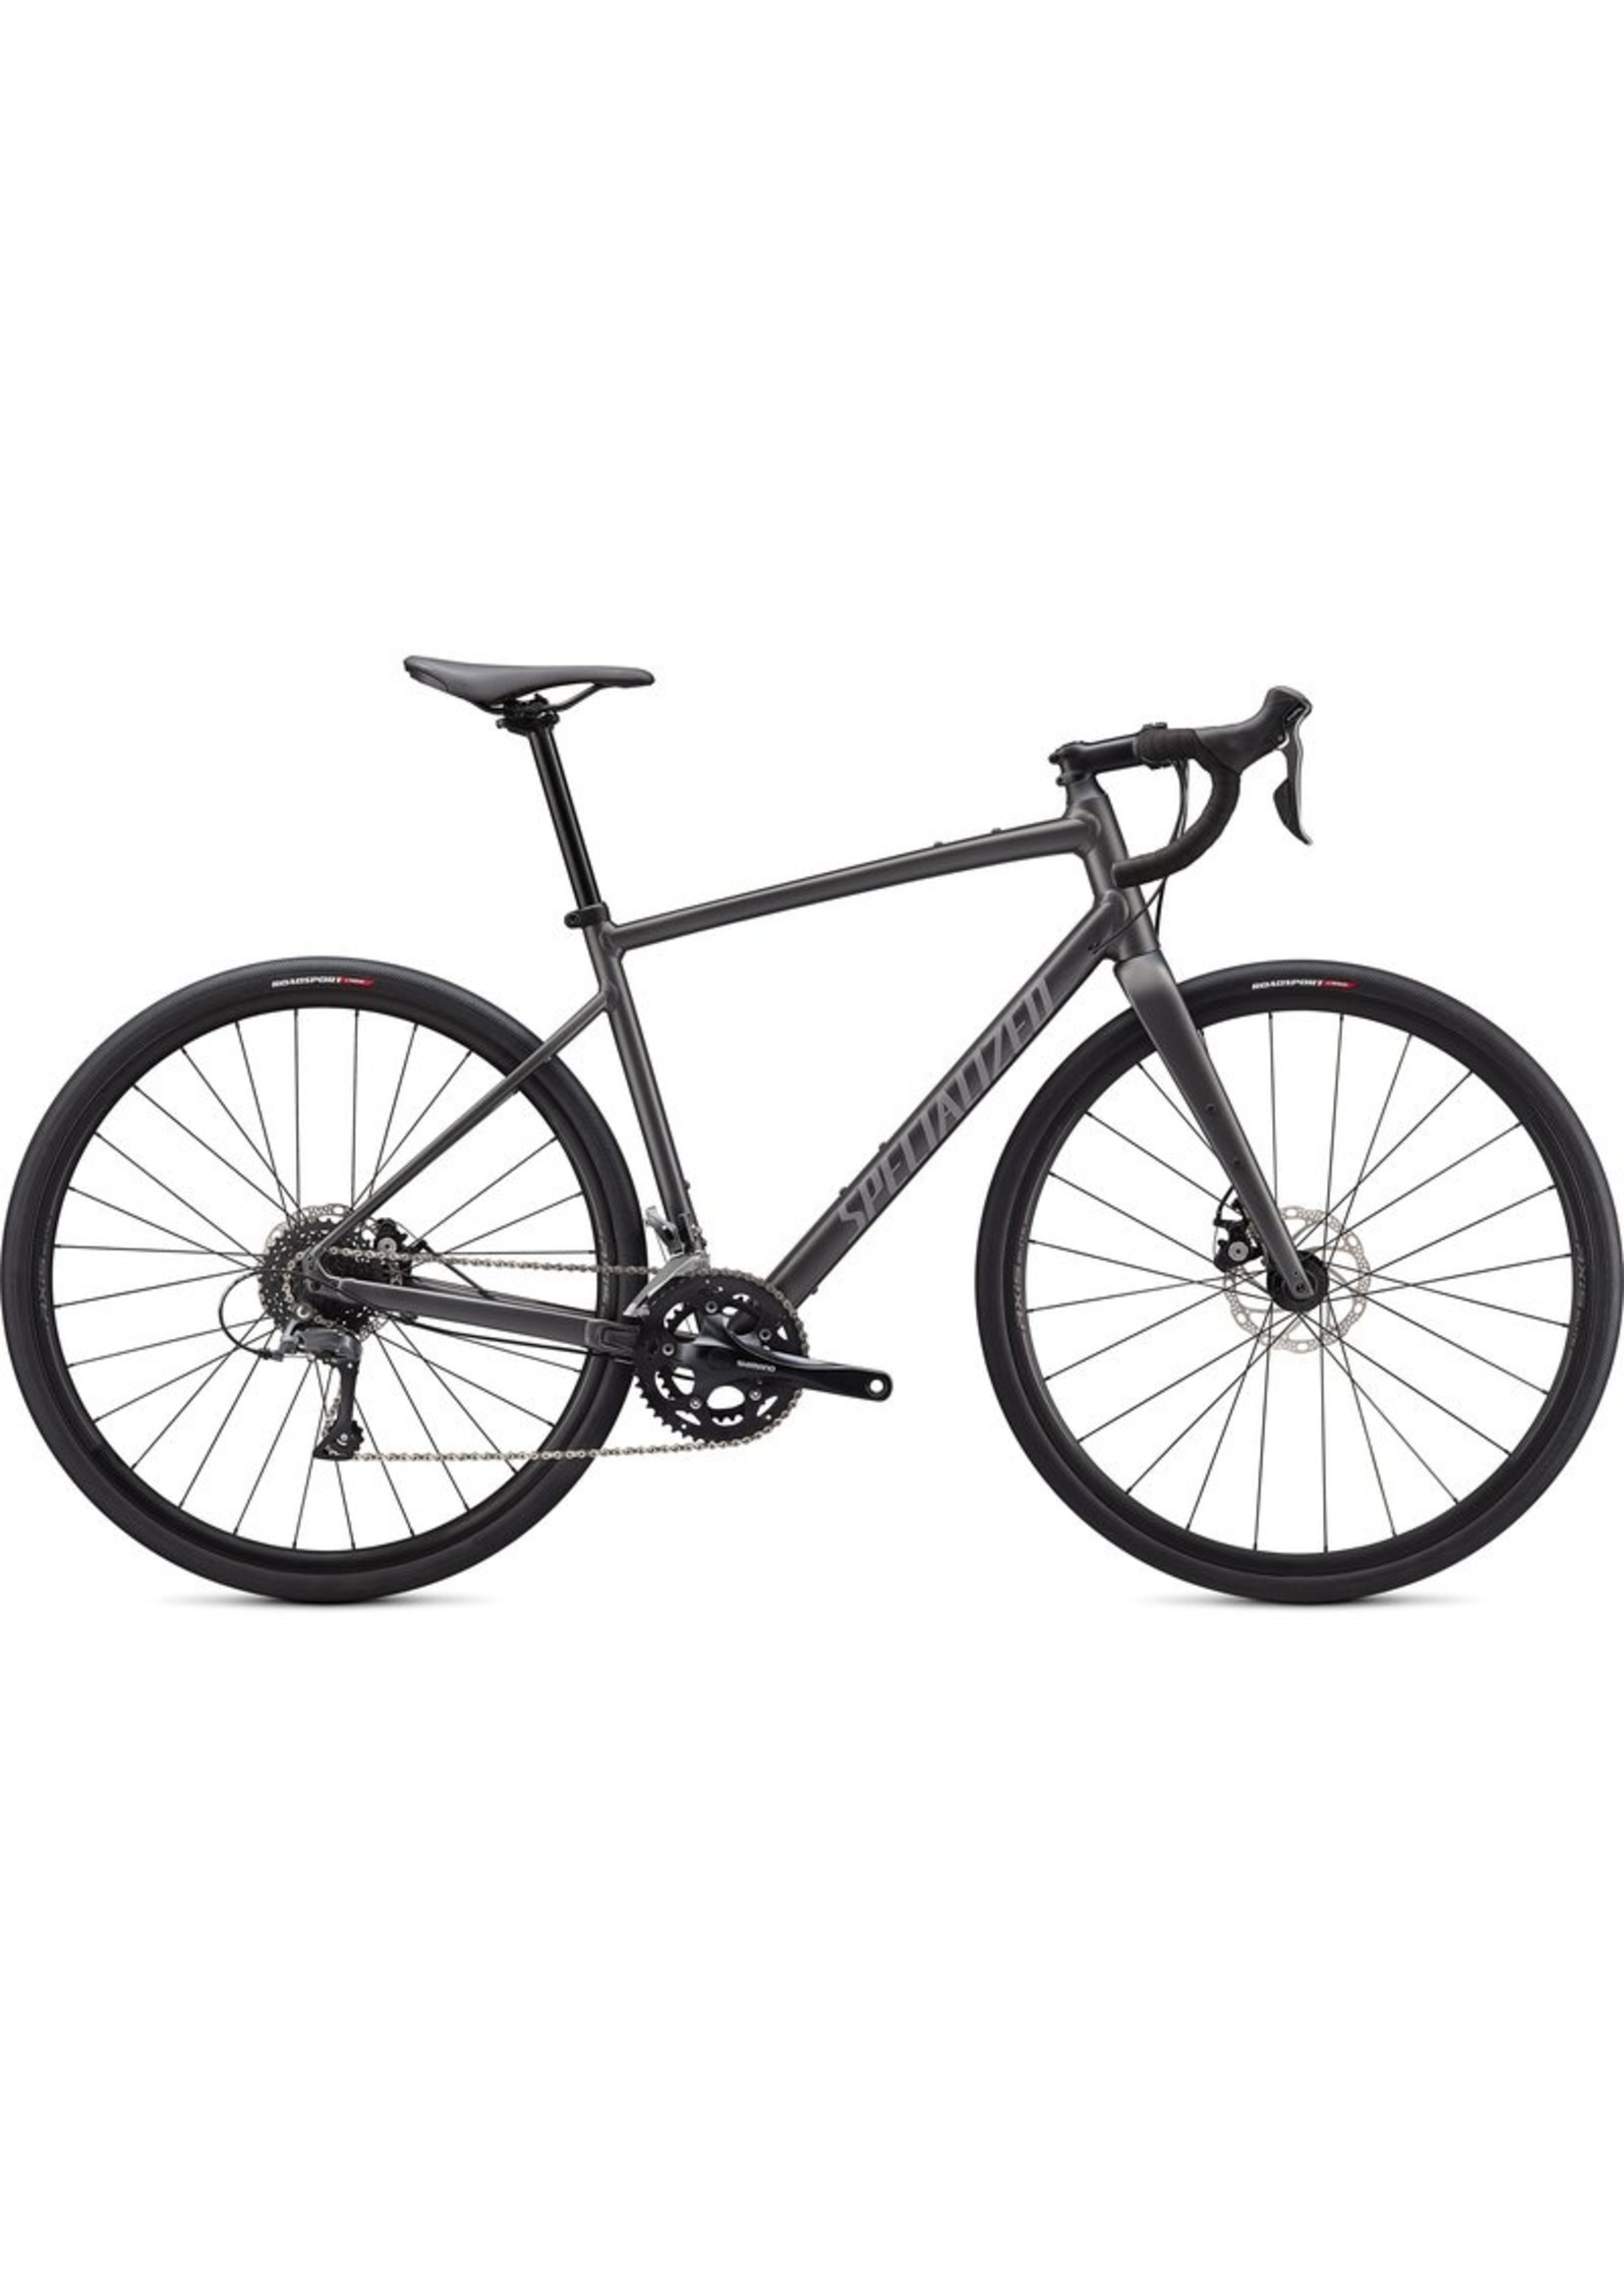 Specialized DIVERGE E5 SMK/CLGRY/CHRM 54